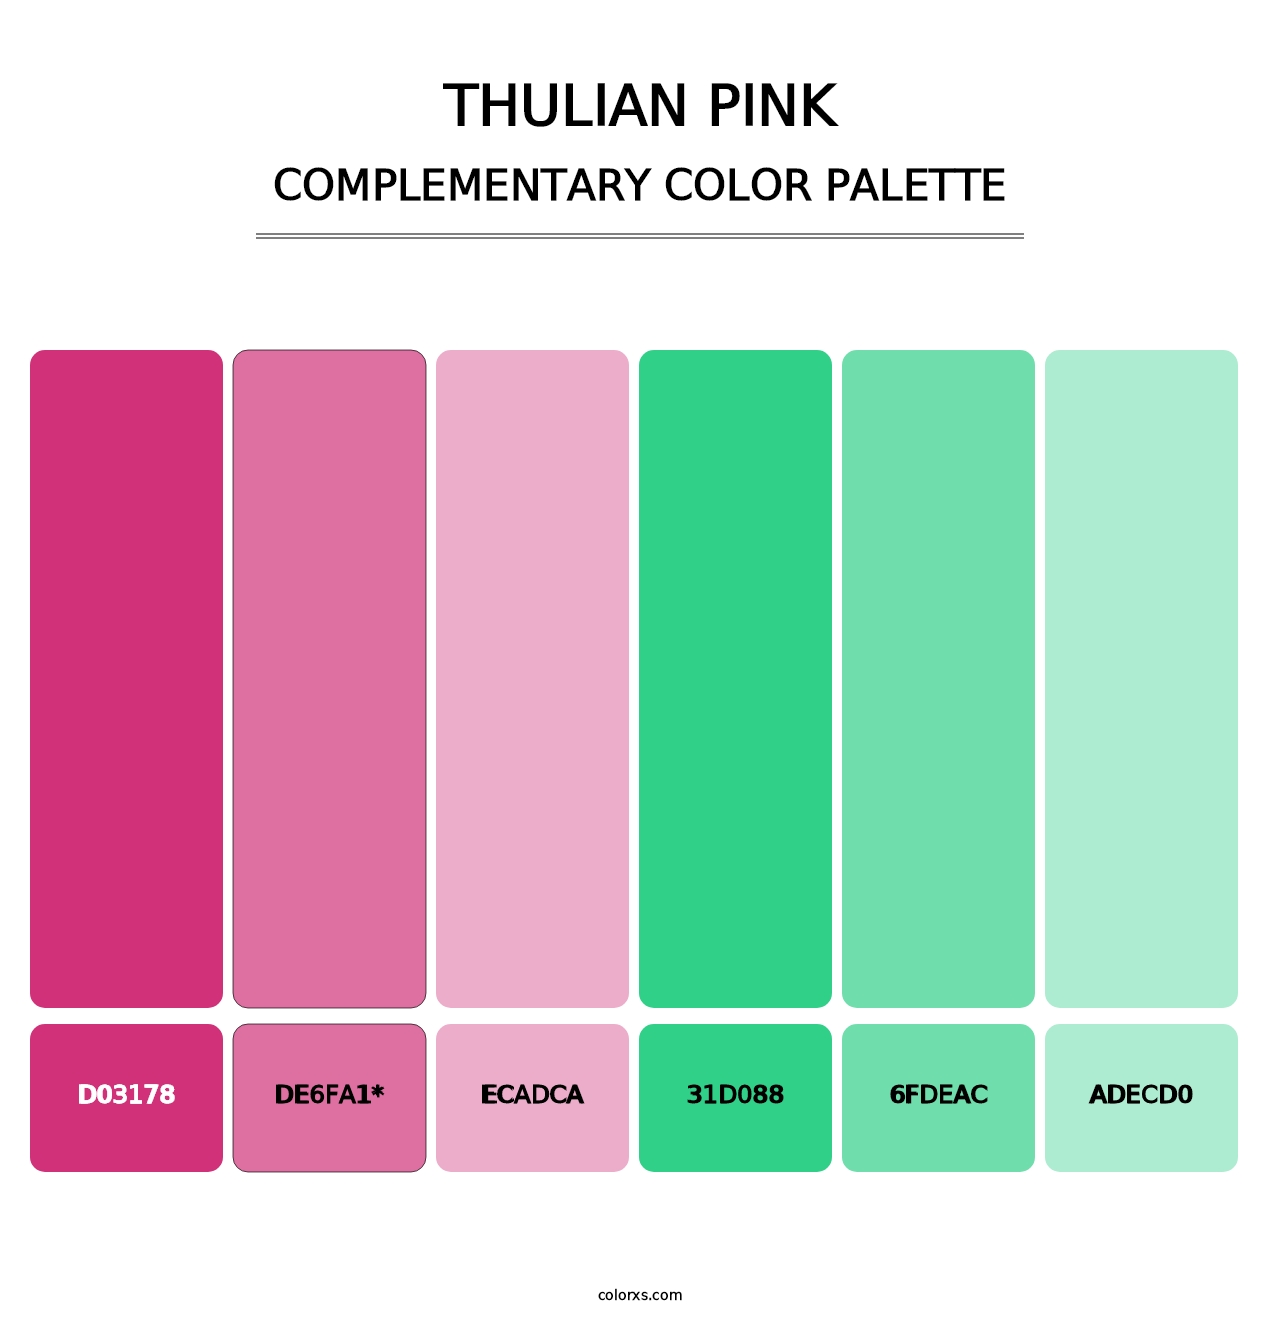 Thulian Pink - Complementary Color Palette